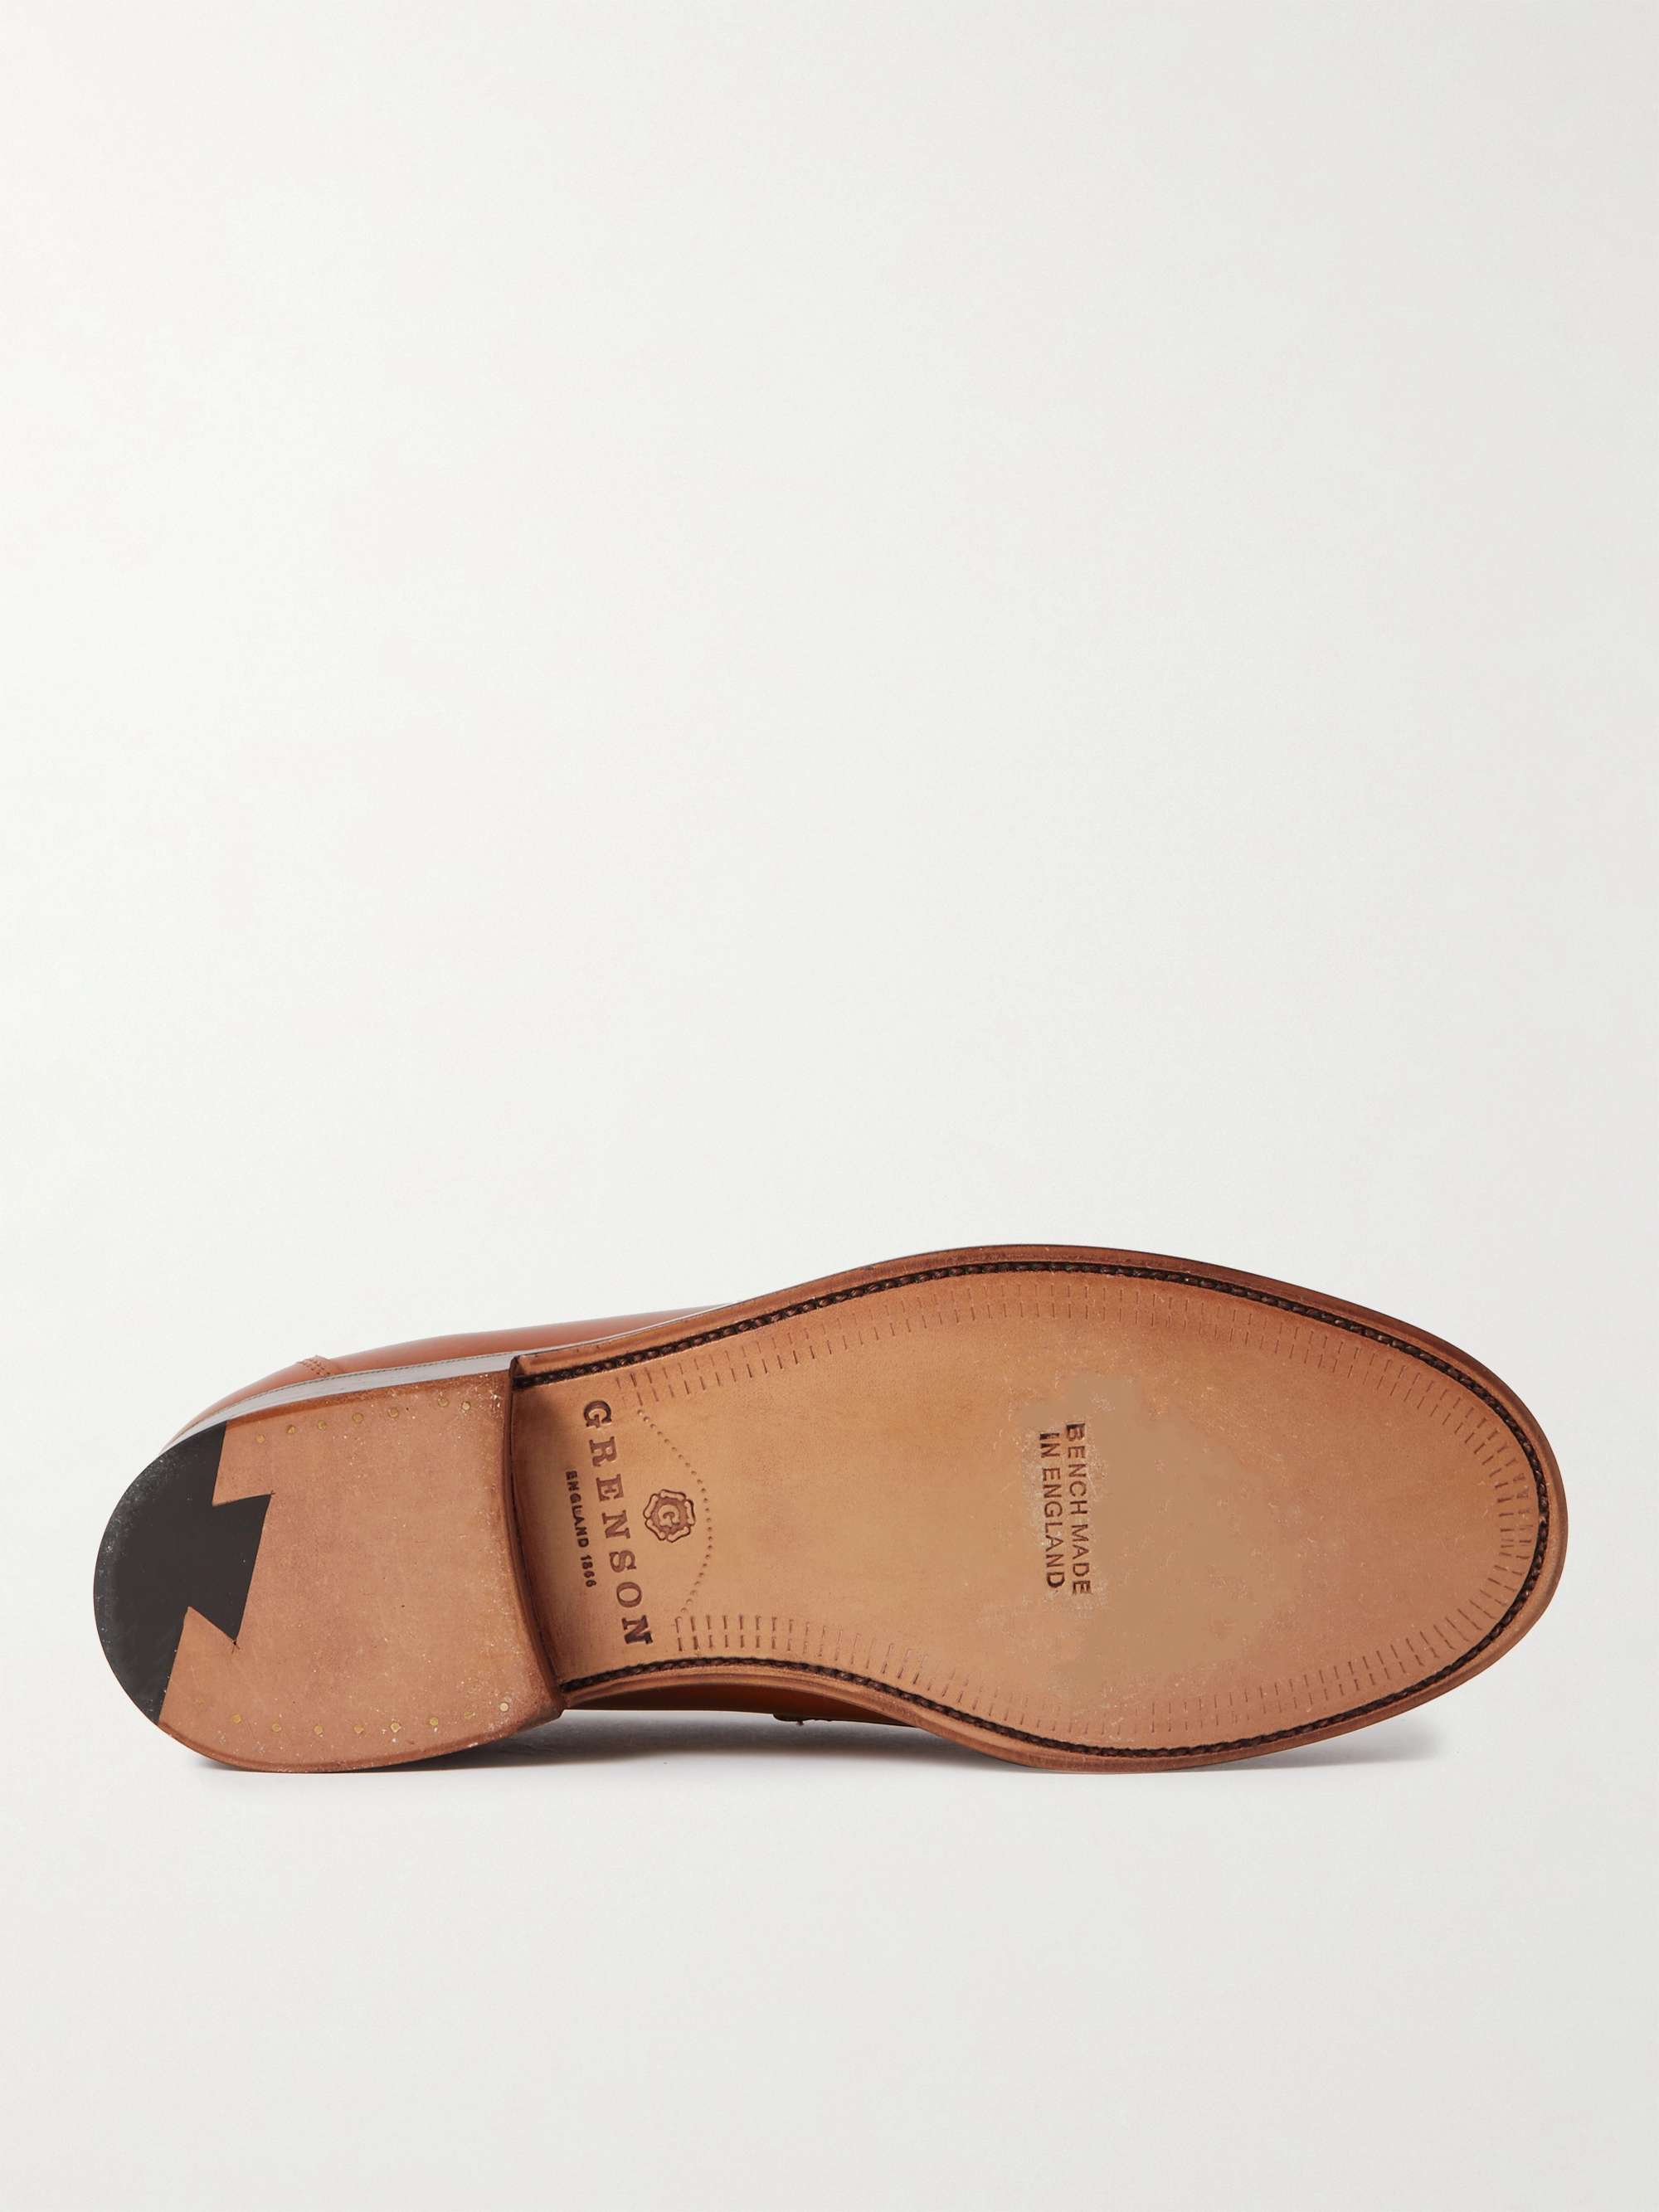 GRENSON Epsom Two-Tone Leather Penny Loafers